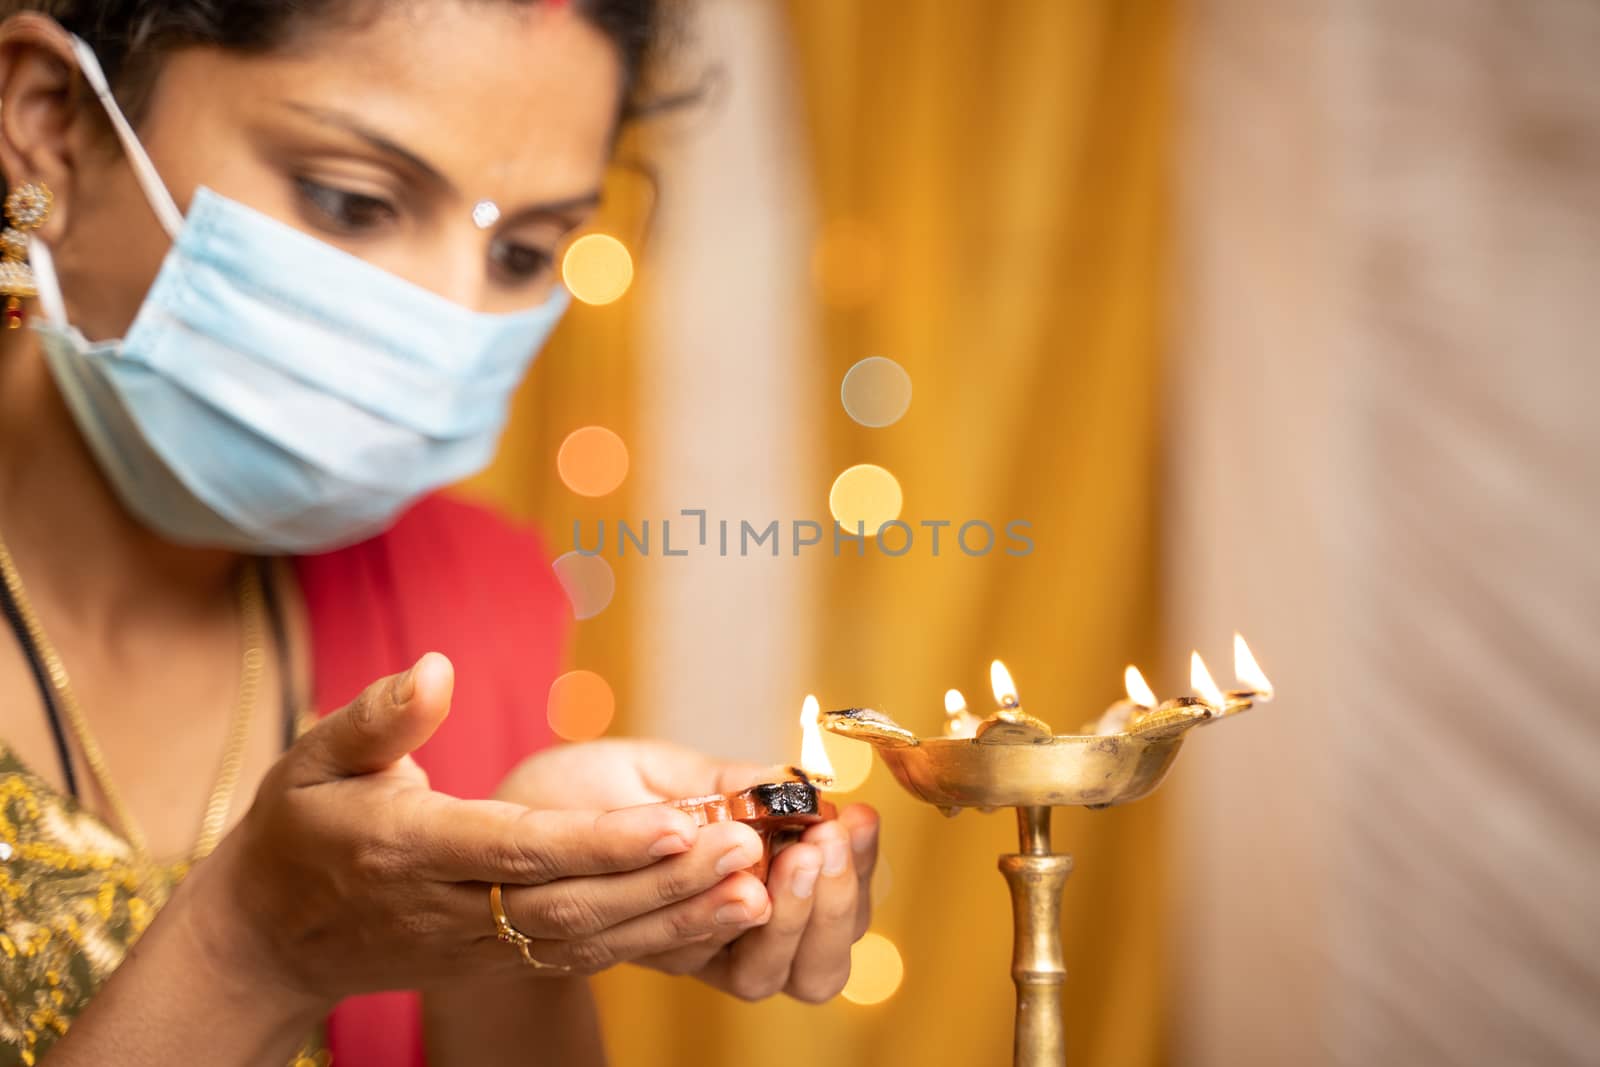 Selective focus on hands, Indian woman in medical mask lighting lantern or Diya Lamp during festival at home - concept of traditional festival celebrations during Coronavirus or Covid-19 Pandemic by lakshmiprasad.maski@gmai.com